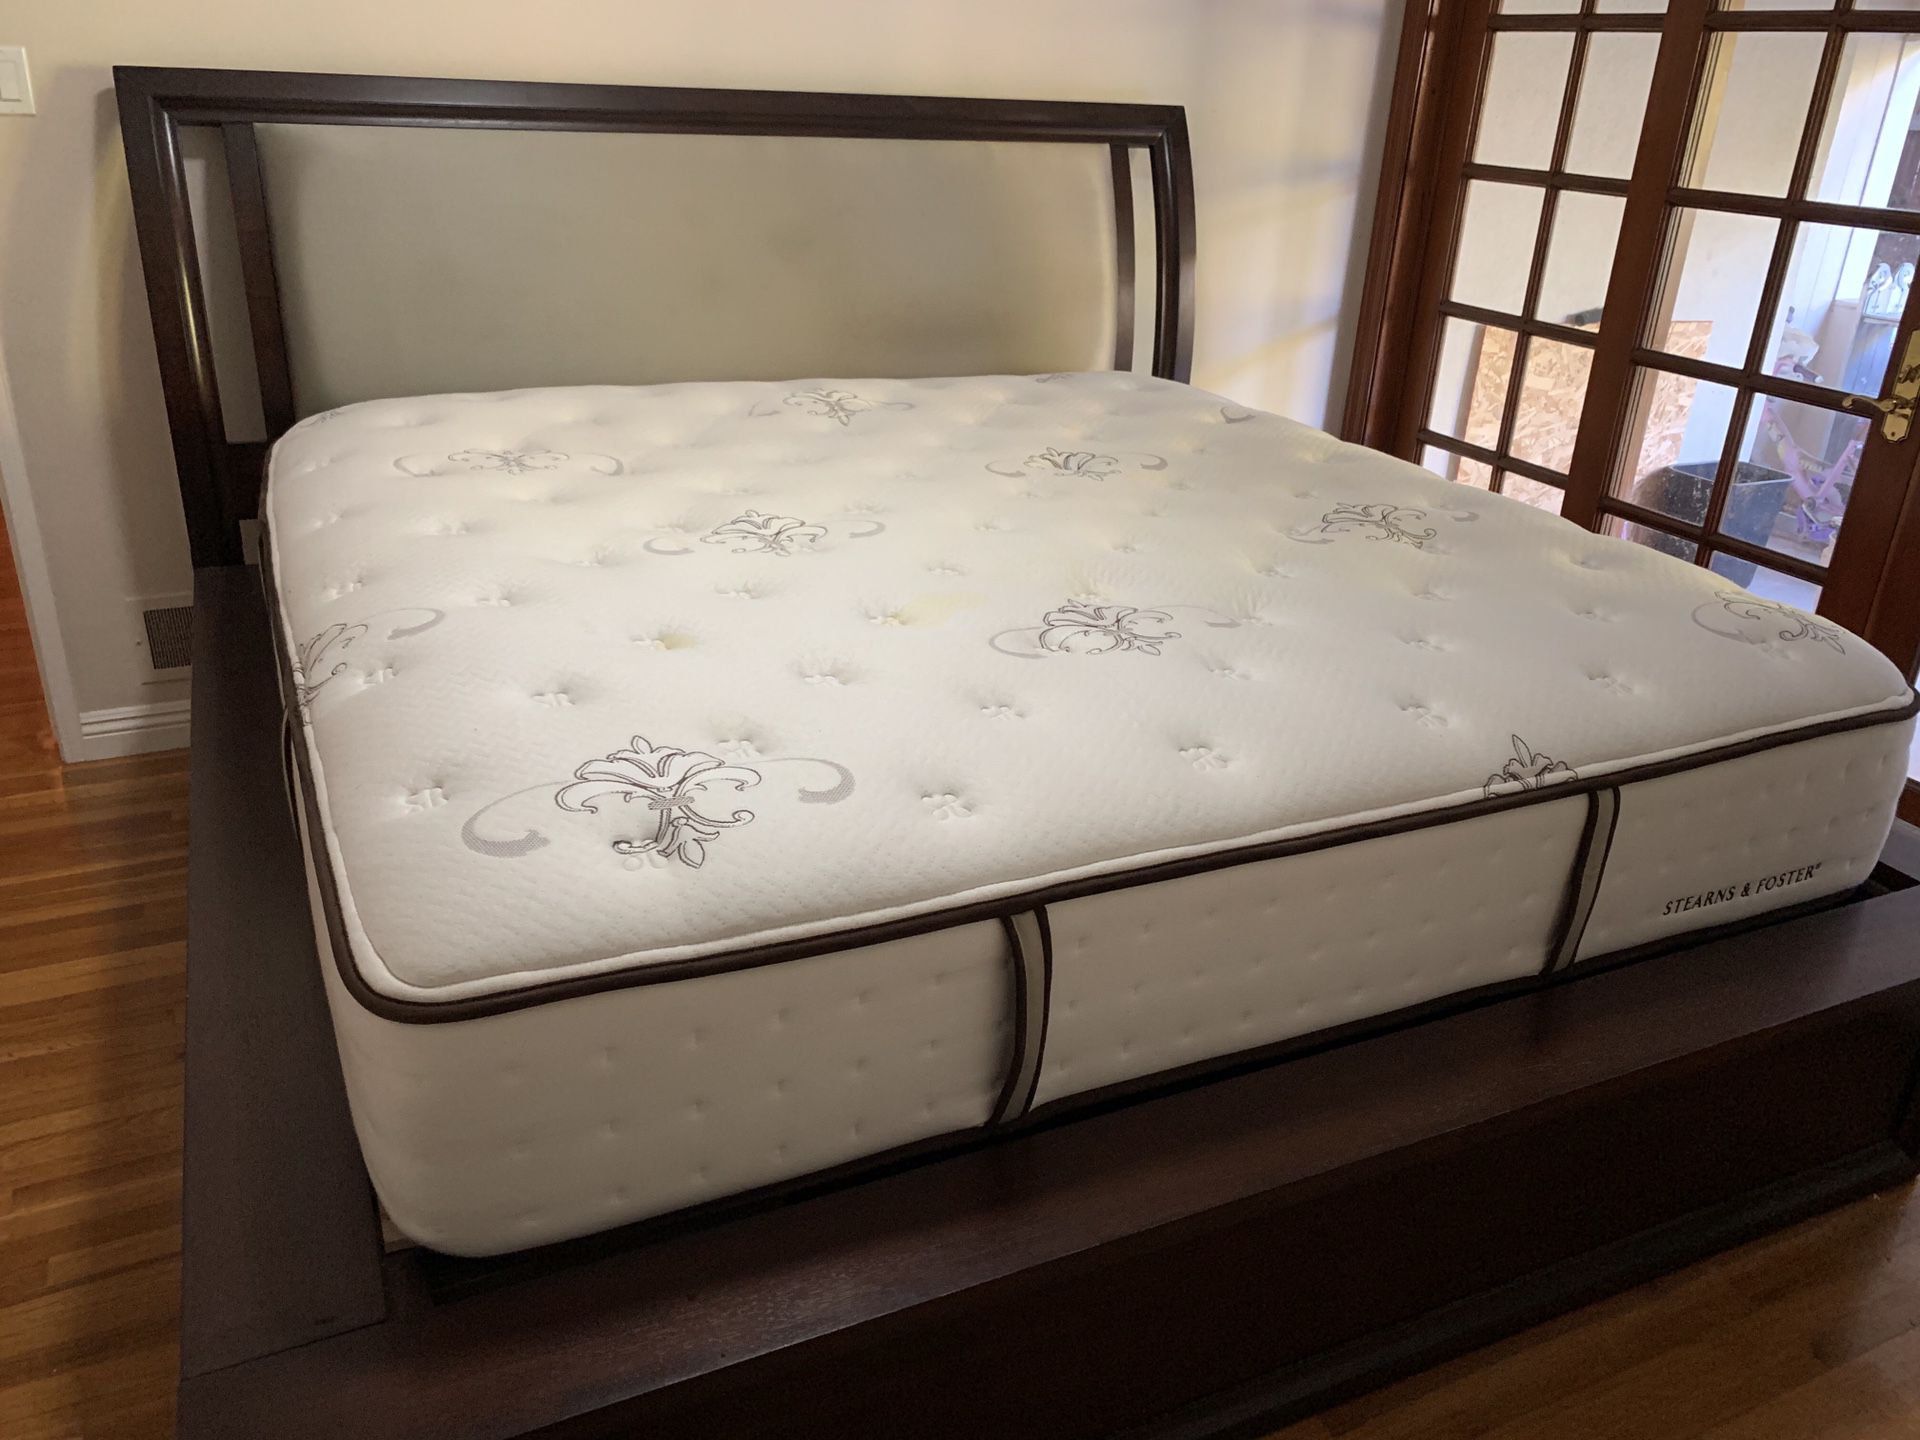 stearns and foster hope bay king mattress